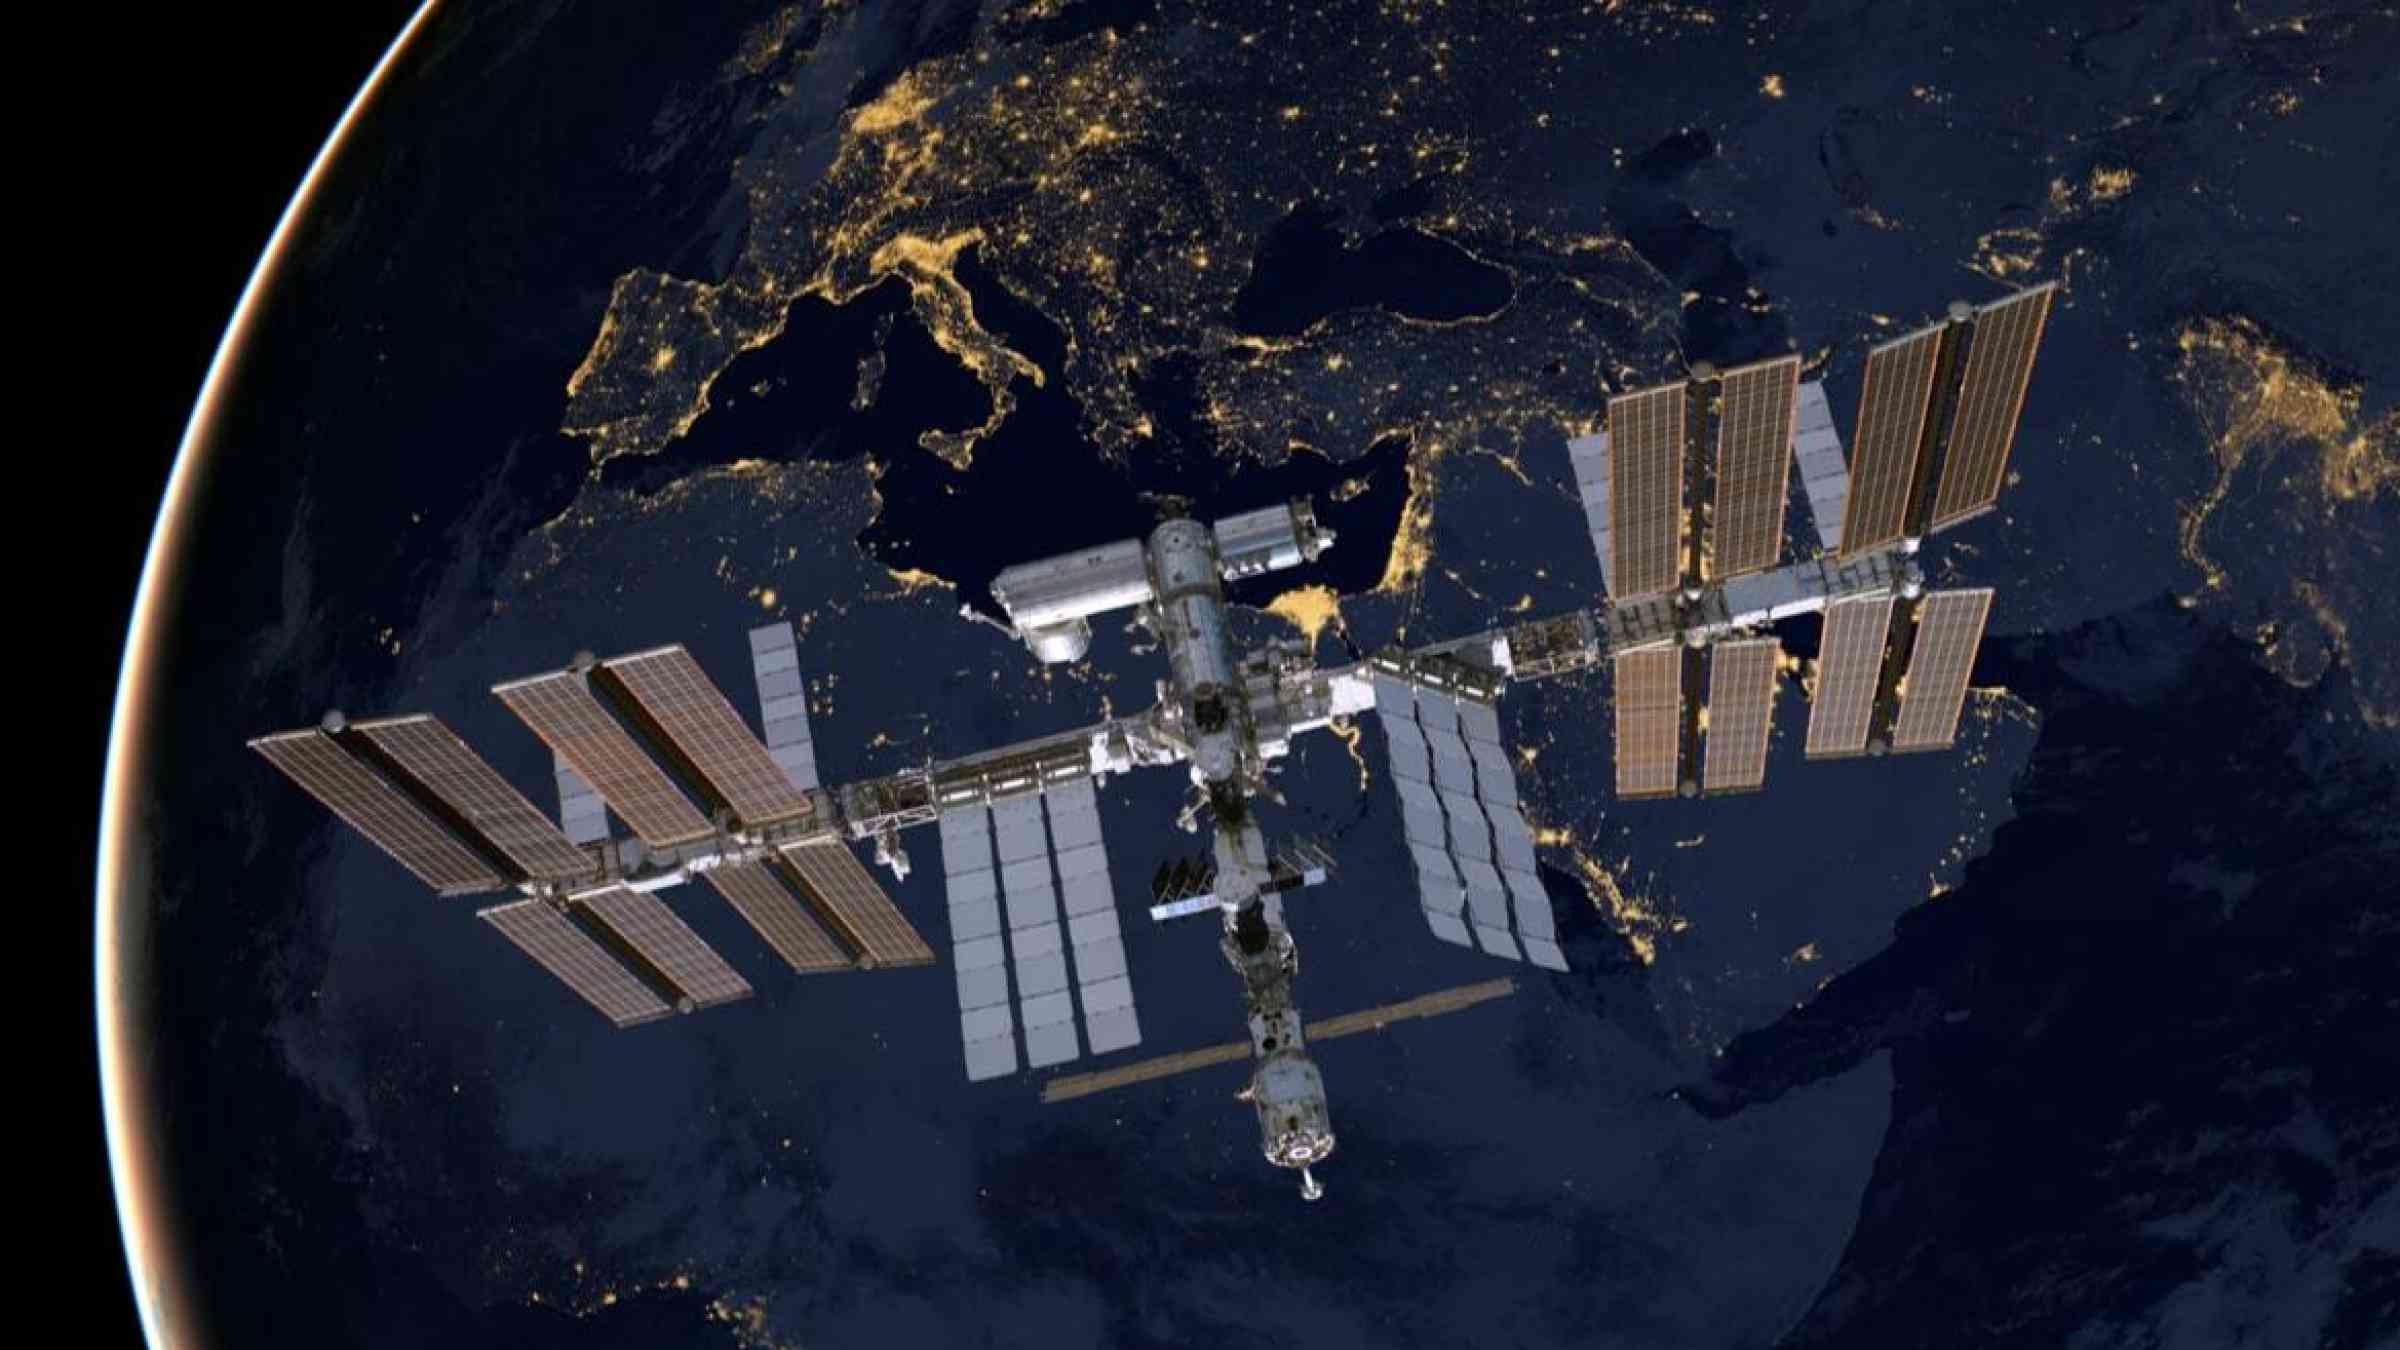 International Space Station above European continent at night